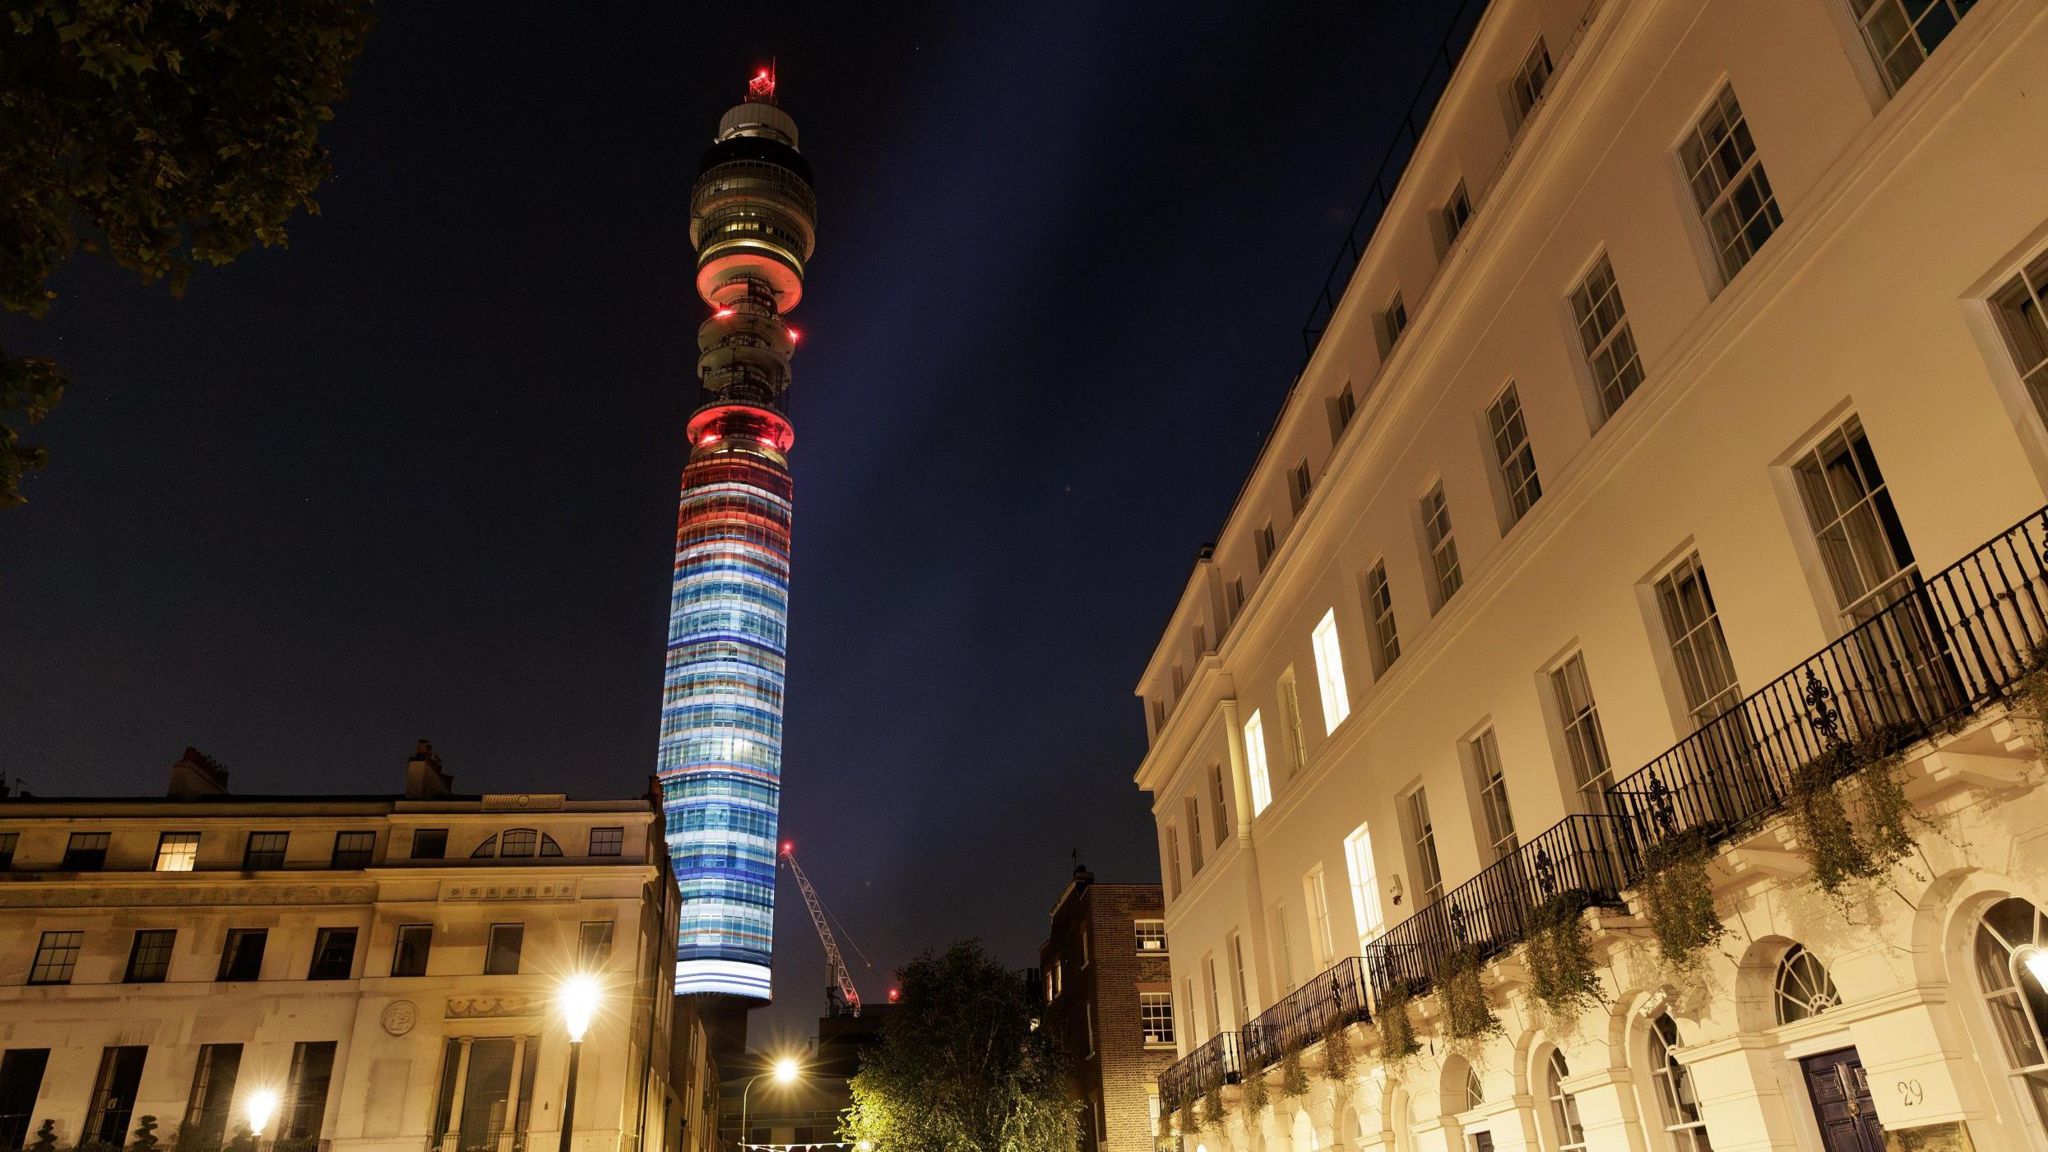 The blue-to-red gradient projected sideways onto a tall thin tower at night, with buildings lit by streetlamps in the foreground